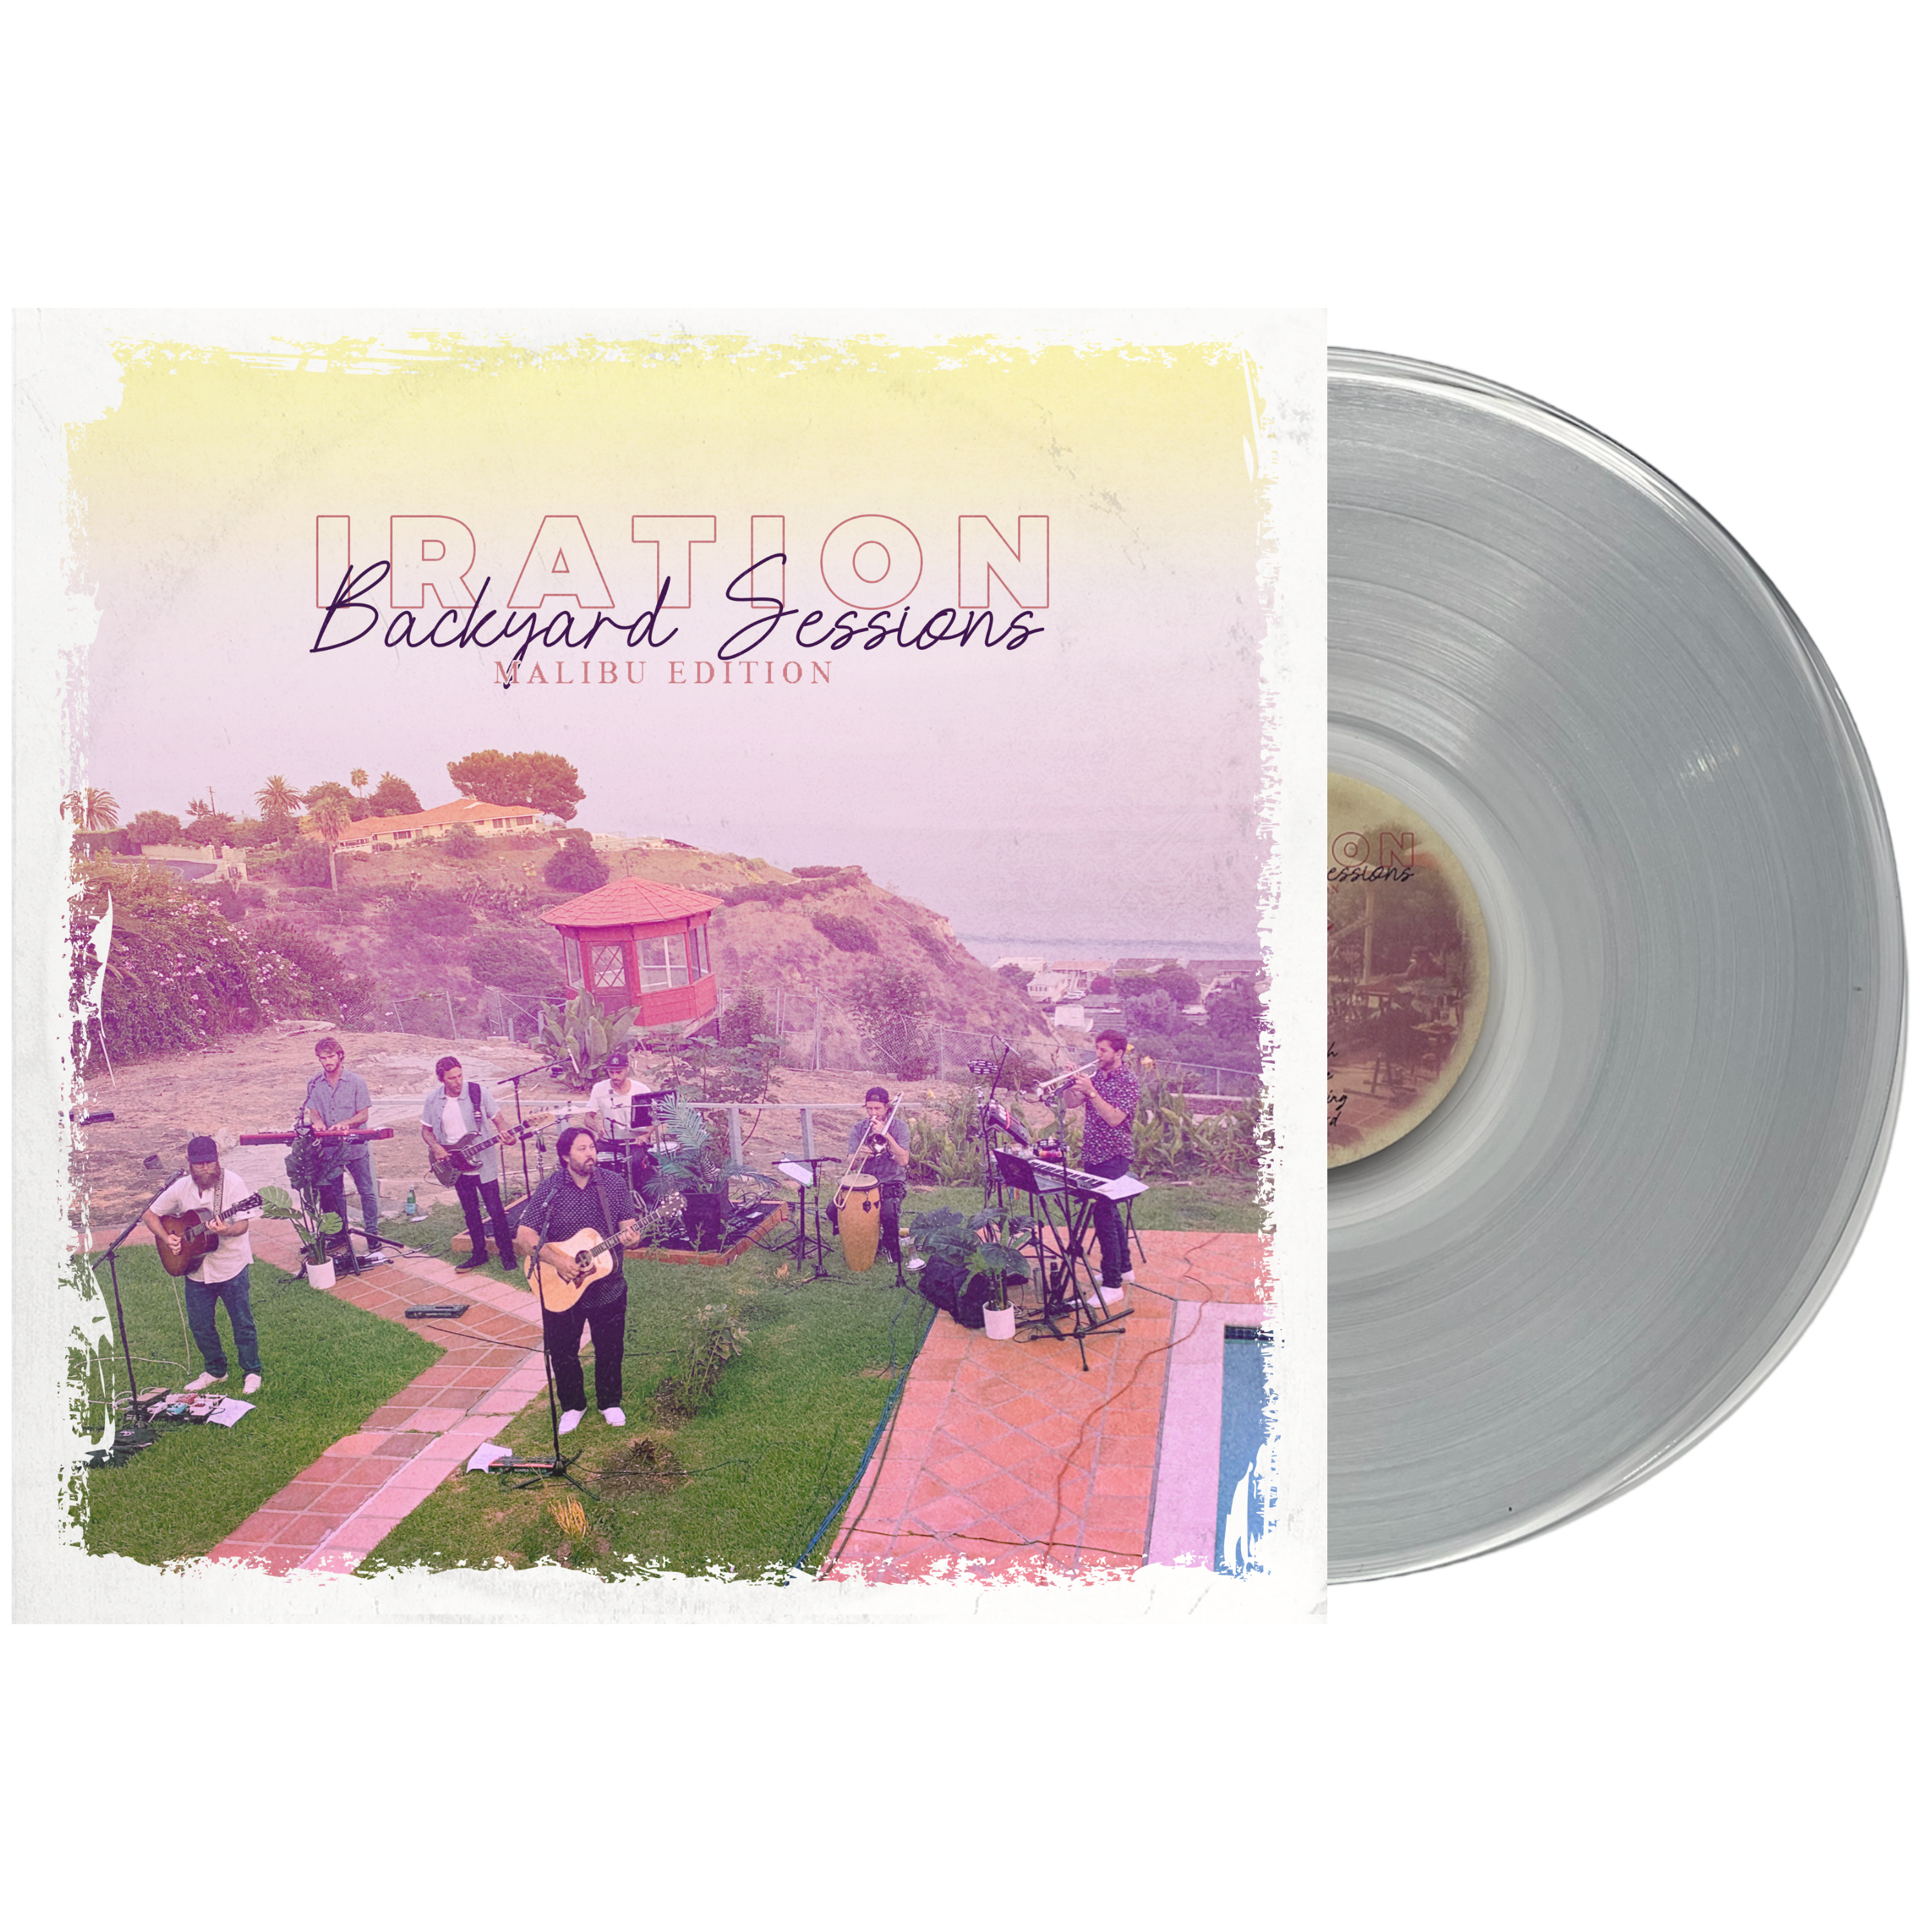 Backyard Sessions Double Vinyl (2 Color Options Available)